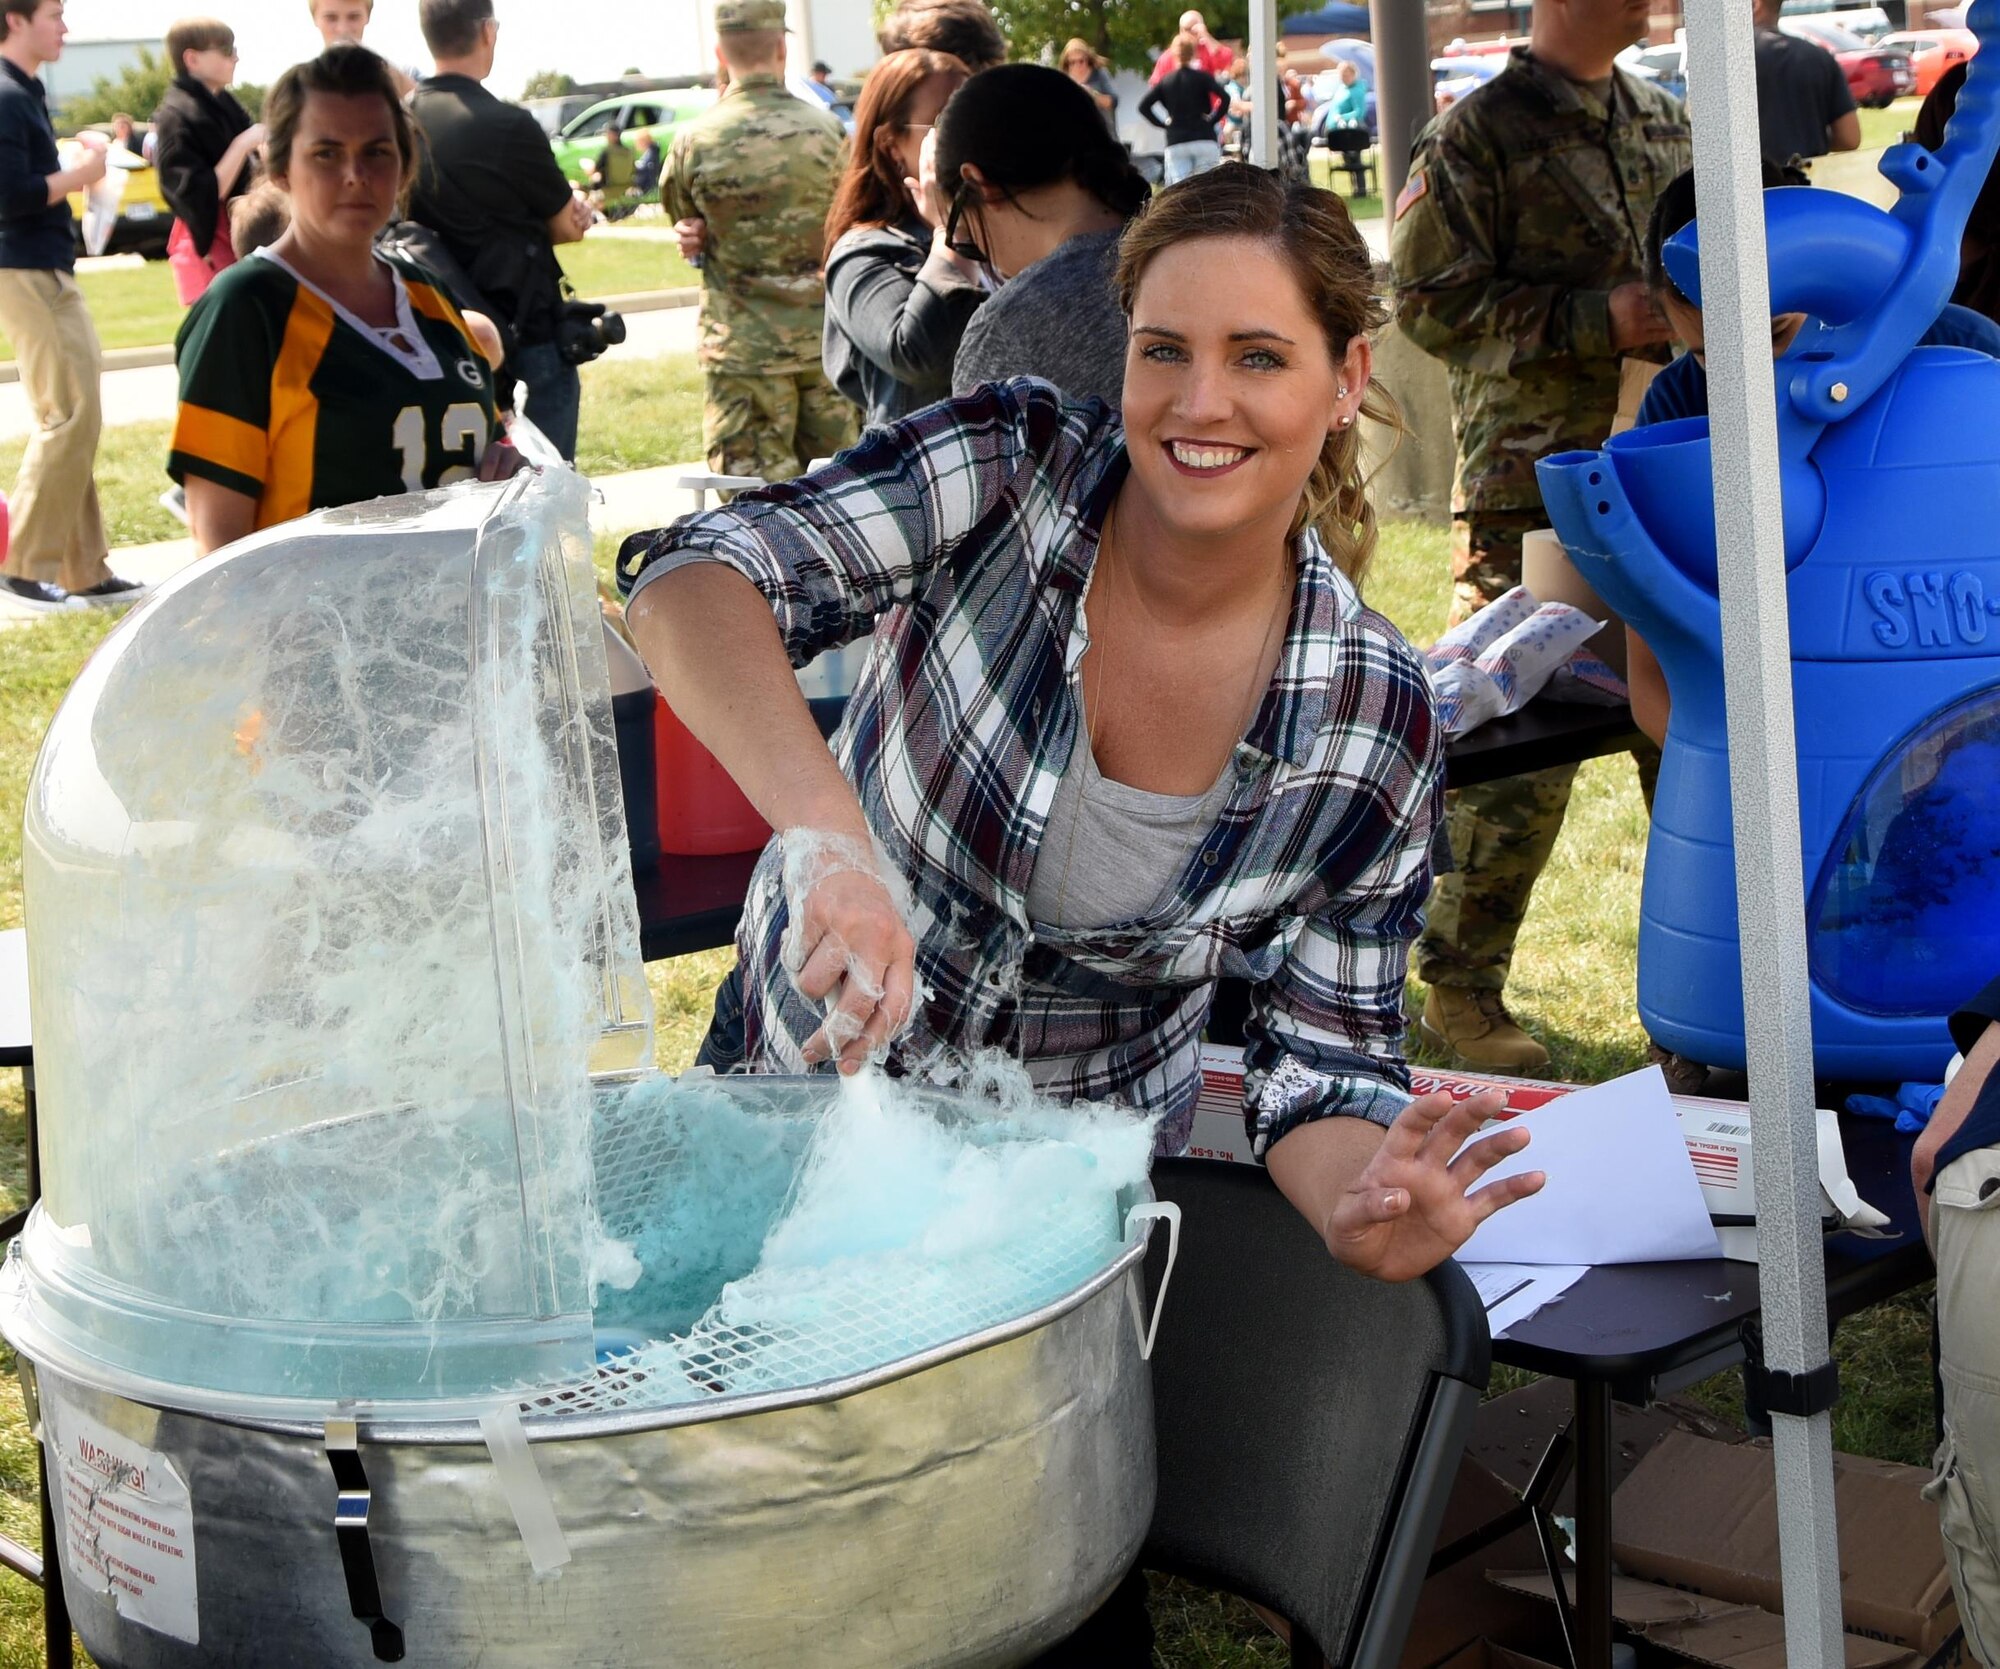 Master Sgt. Kelli Swanton, 178th Civil Engineer Production Controller, prepares cotton candy at the Springfield Air National Guard Base, Springfield Ohio during the Wing's Family Day event Sept. 10, 2017.